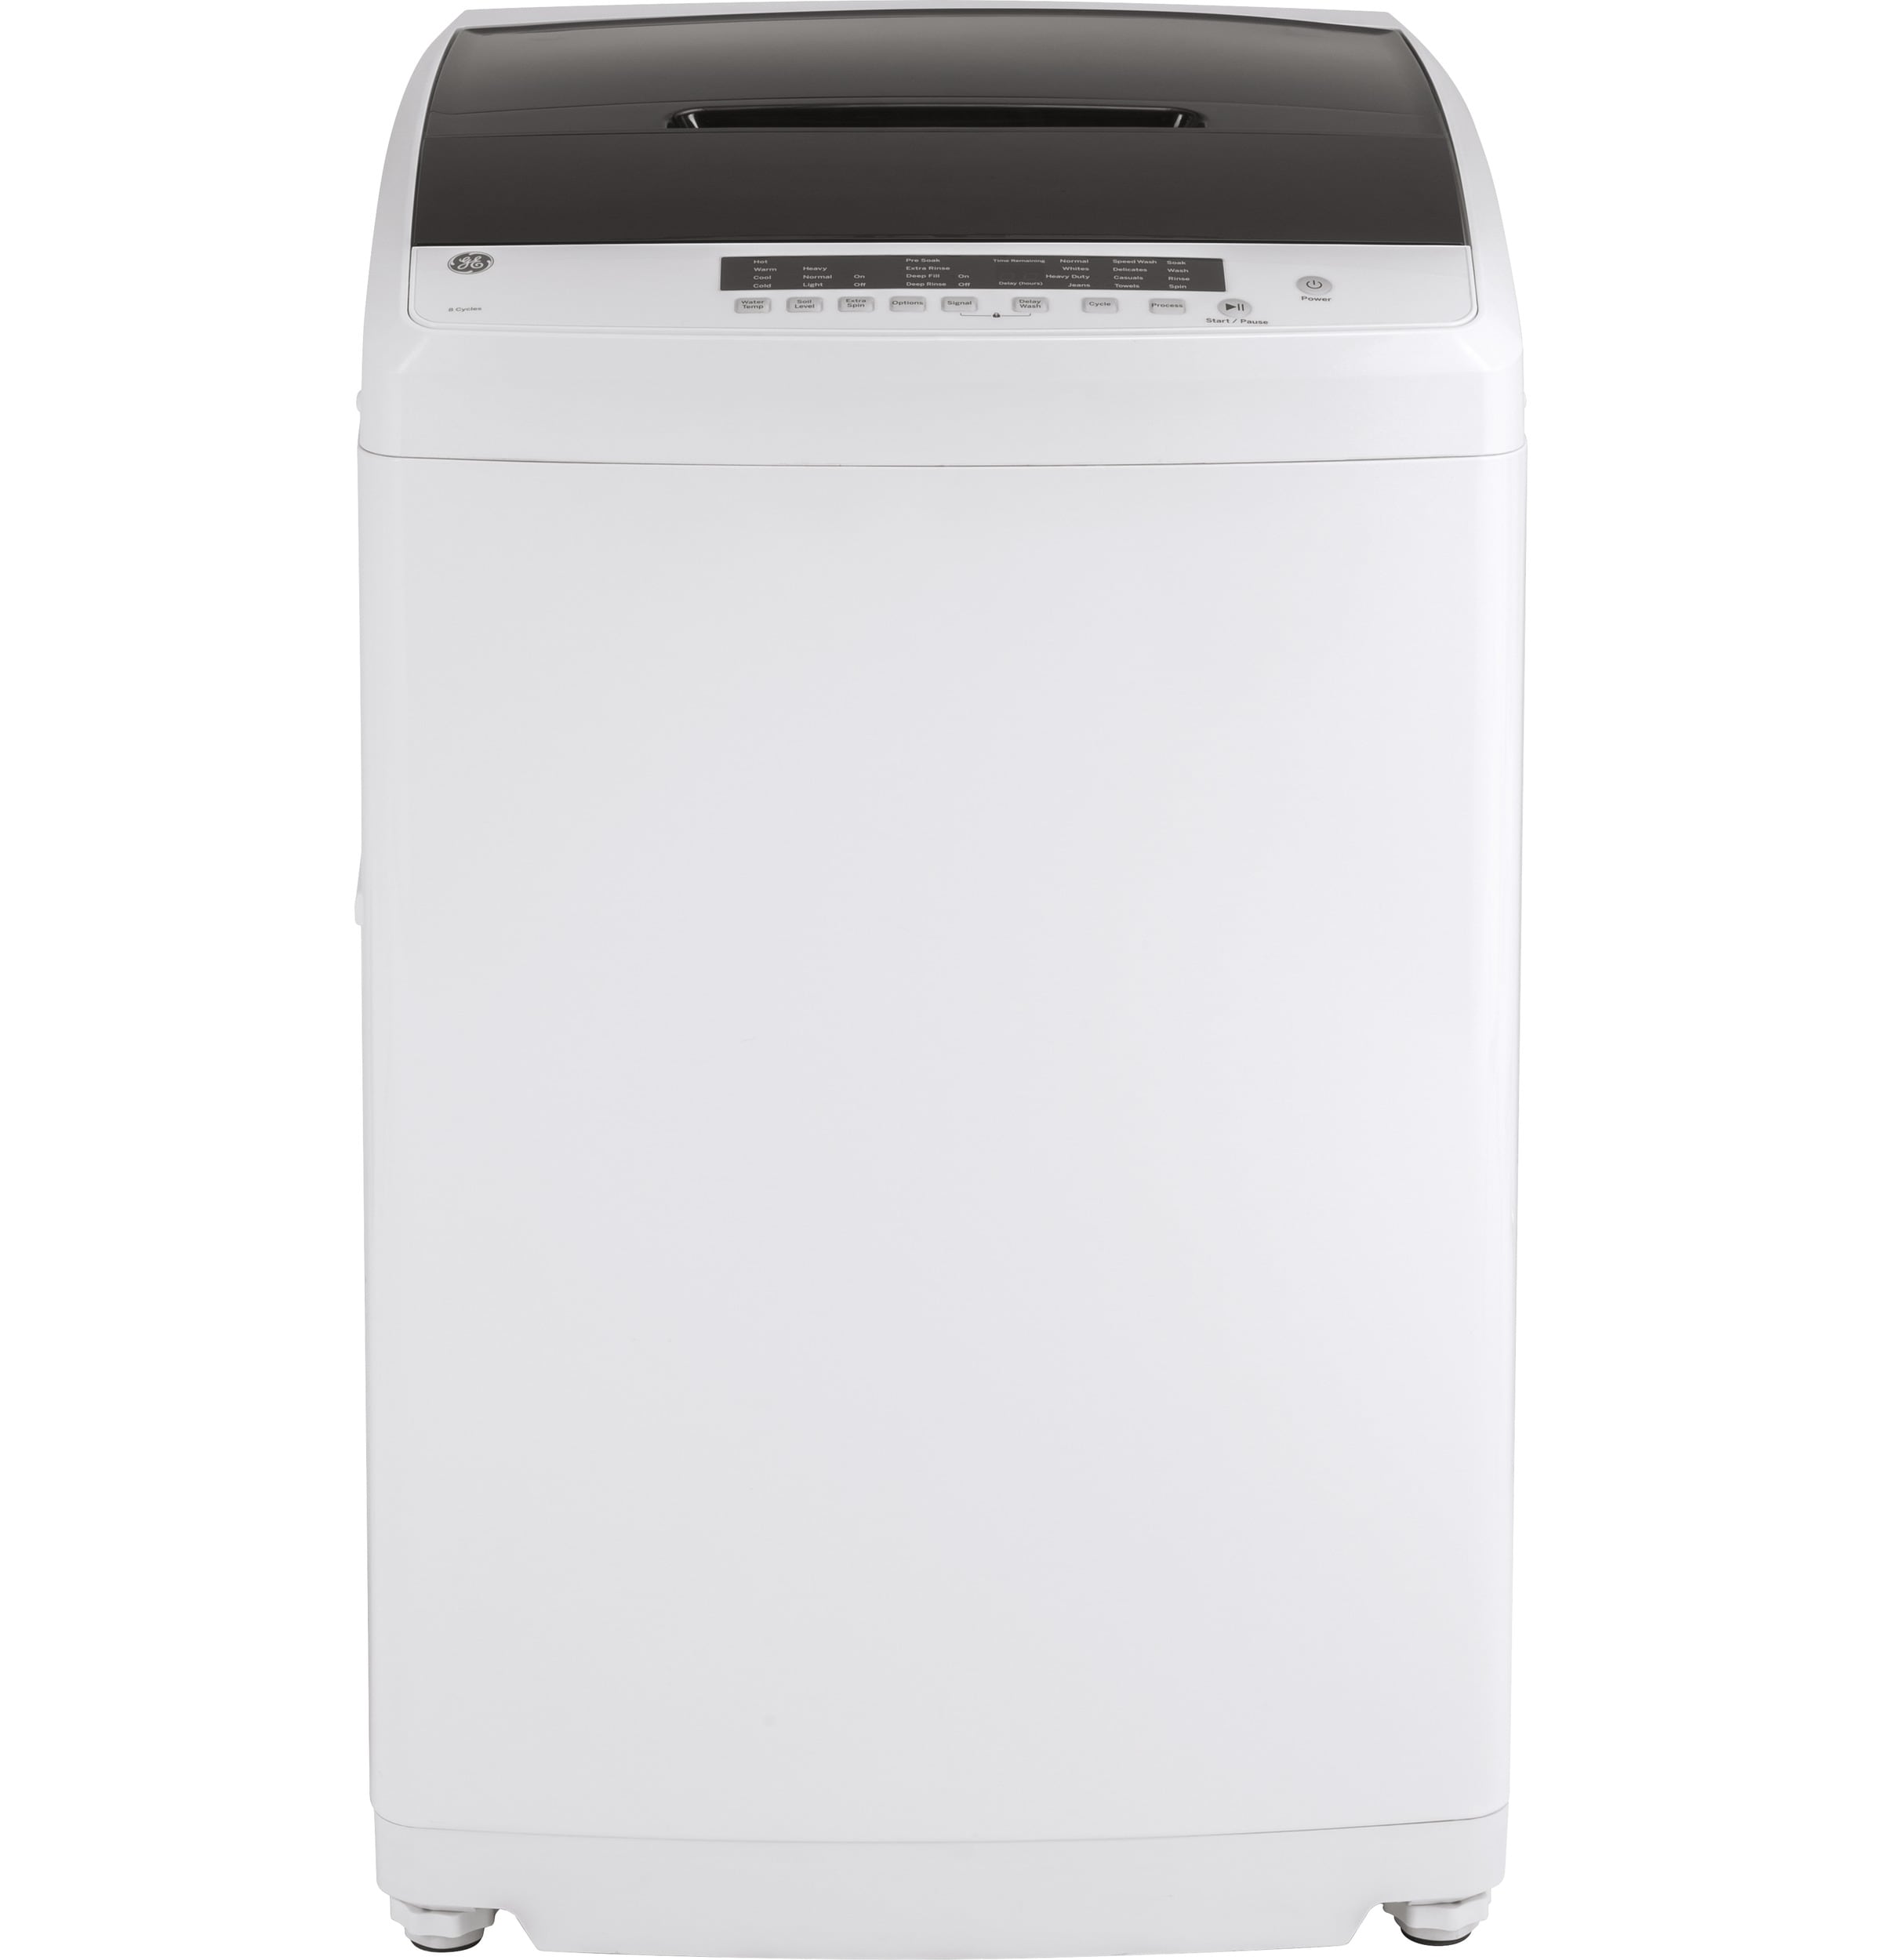 Avanti 25 in. 3.7 cu. ft. Compact Top Load Washer with Agitator - White